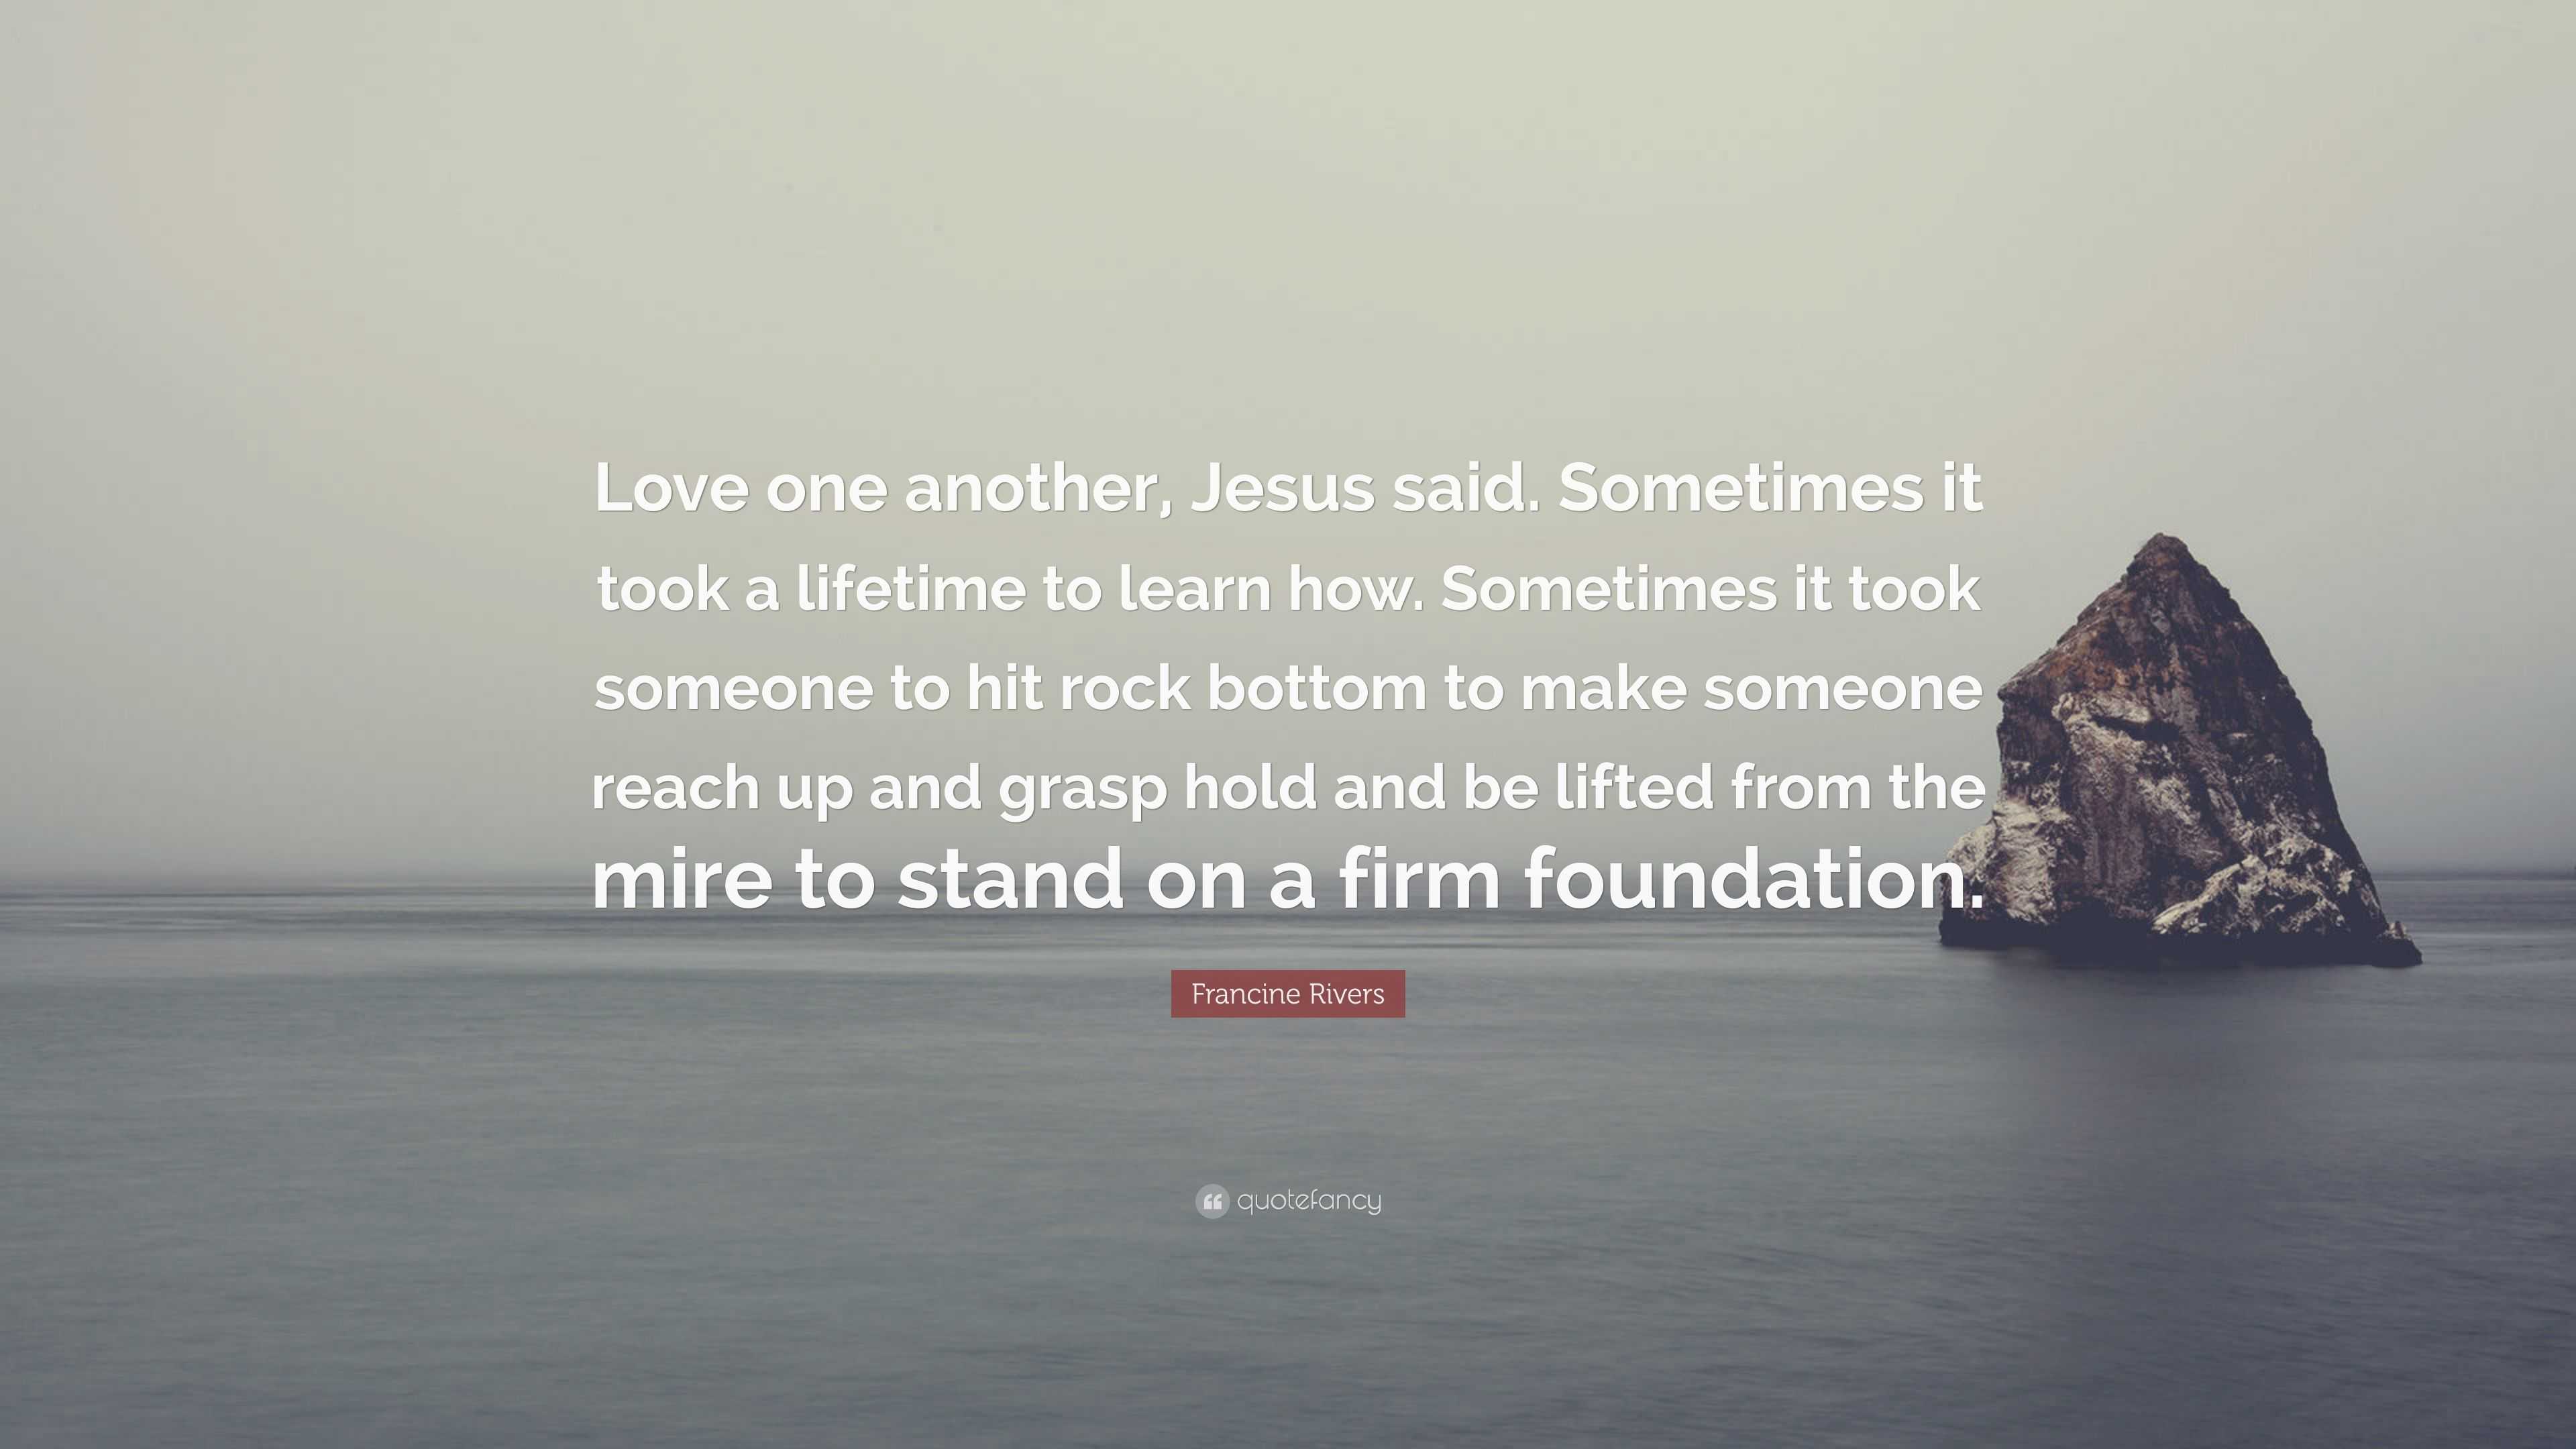 Francine Rivers Quote “Love one another Jesus said Sometimes it took a